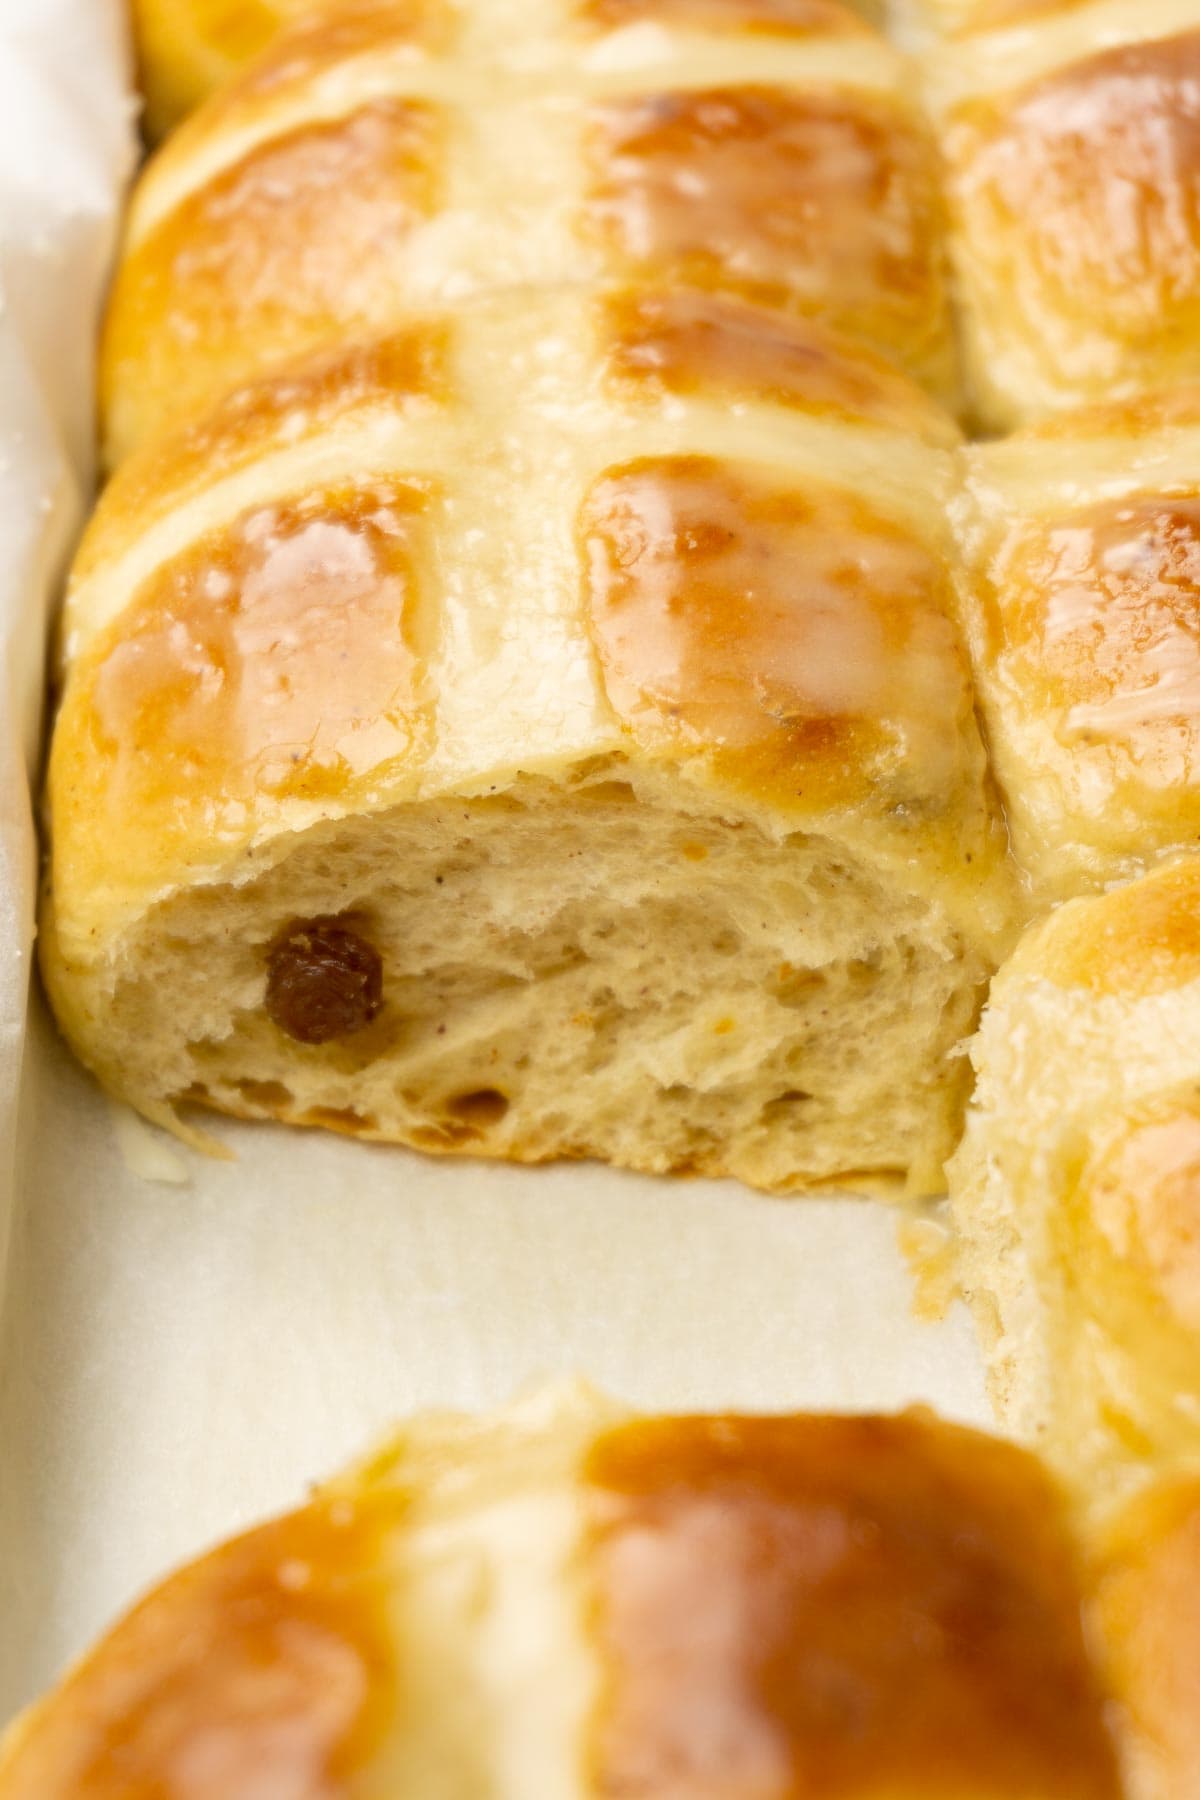 A baking dish filled with glazed hot cross buns, one bun is taken.